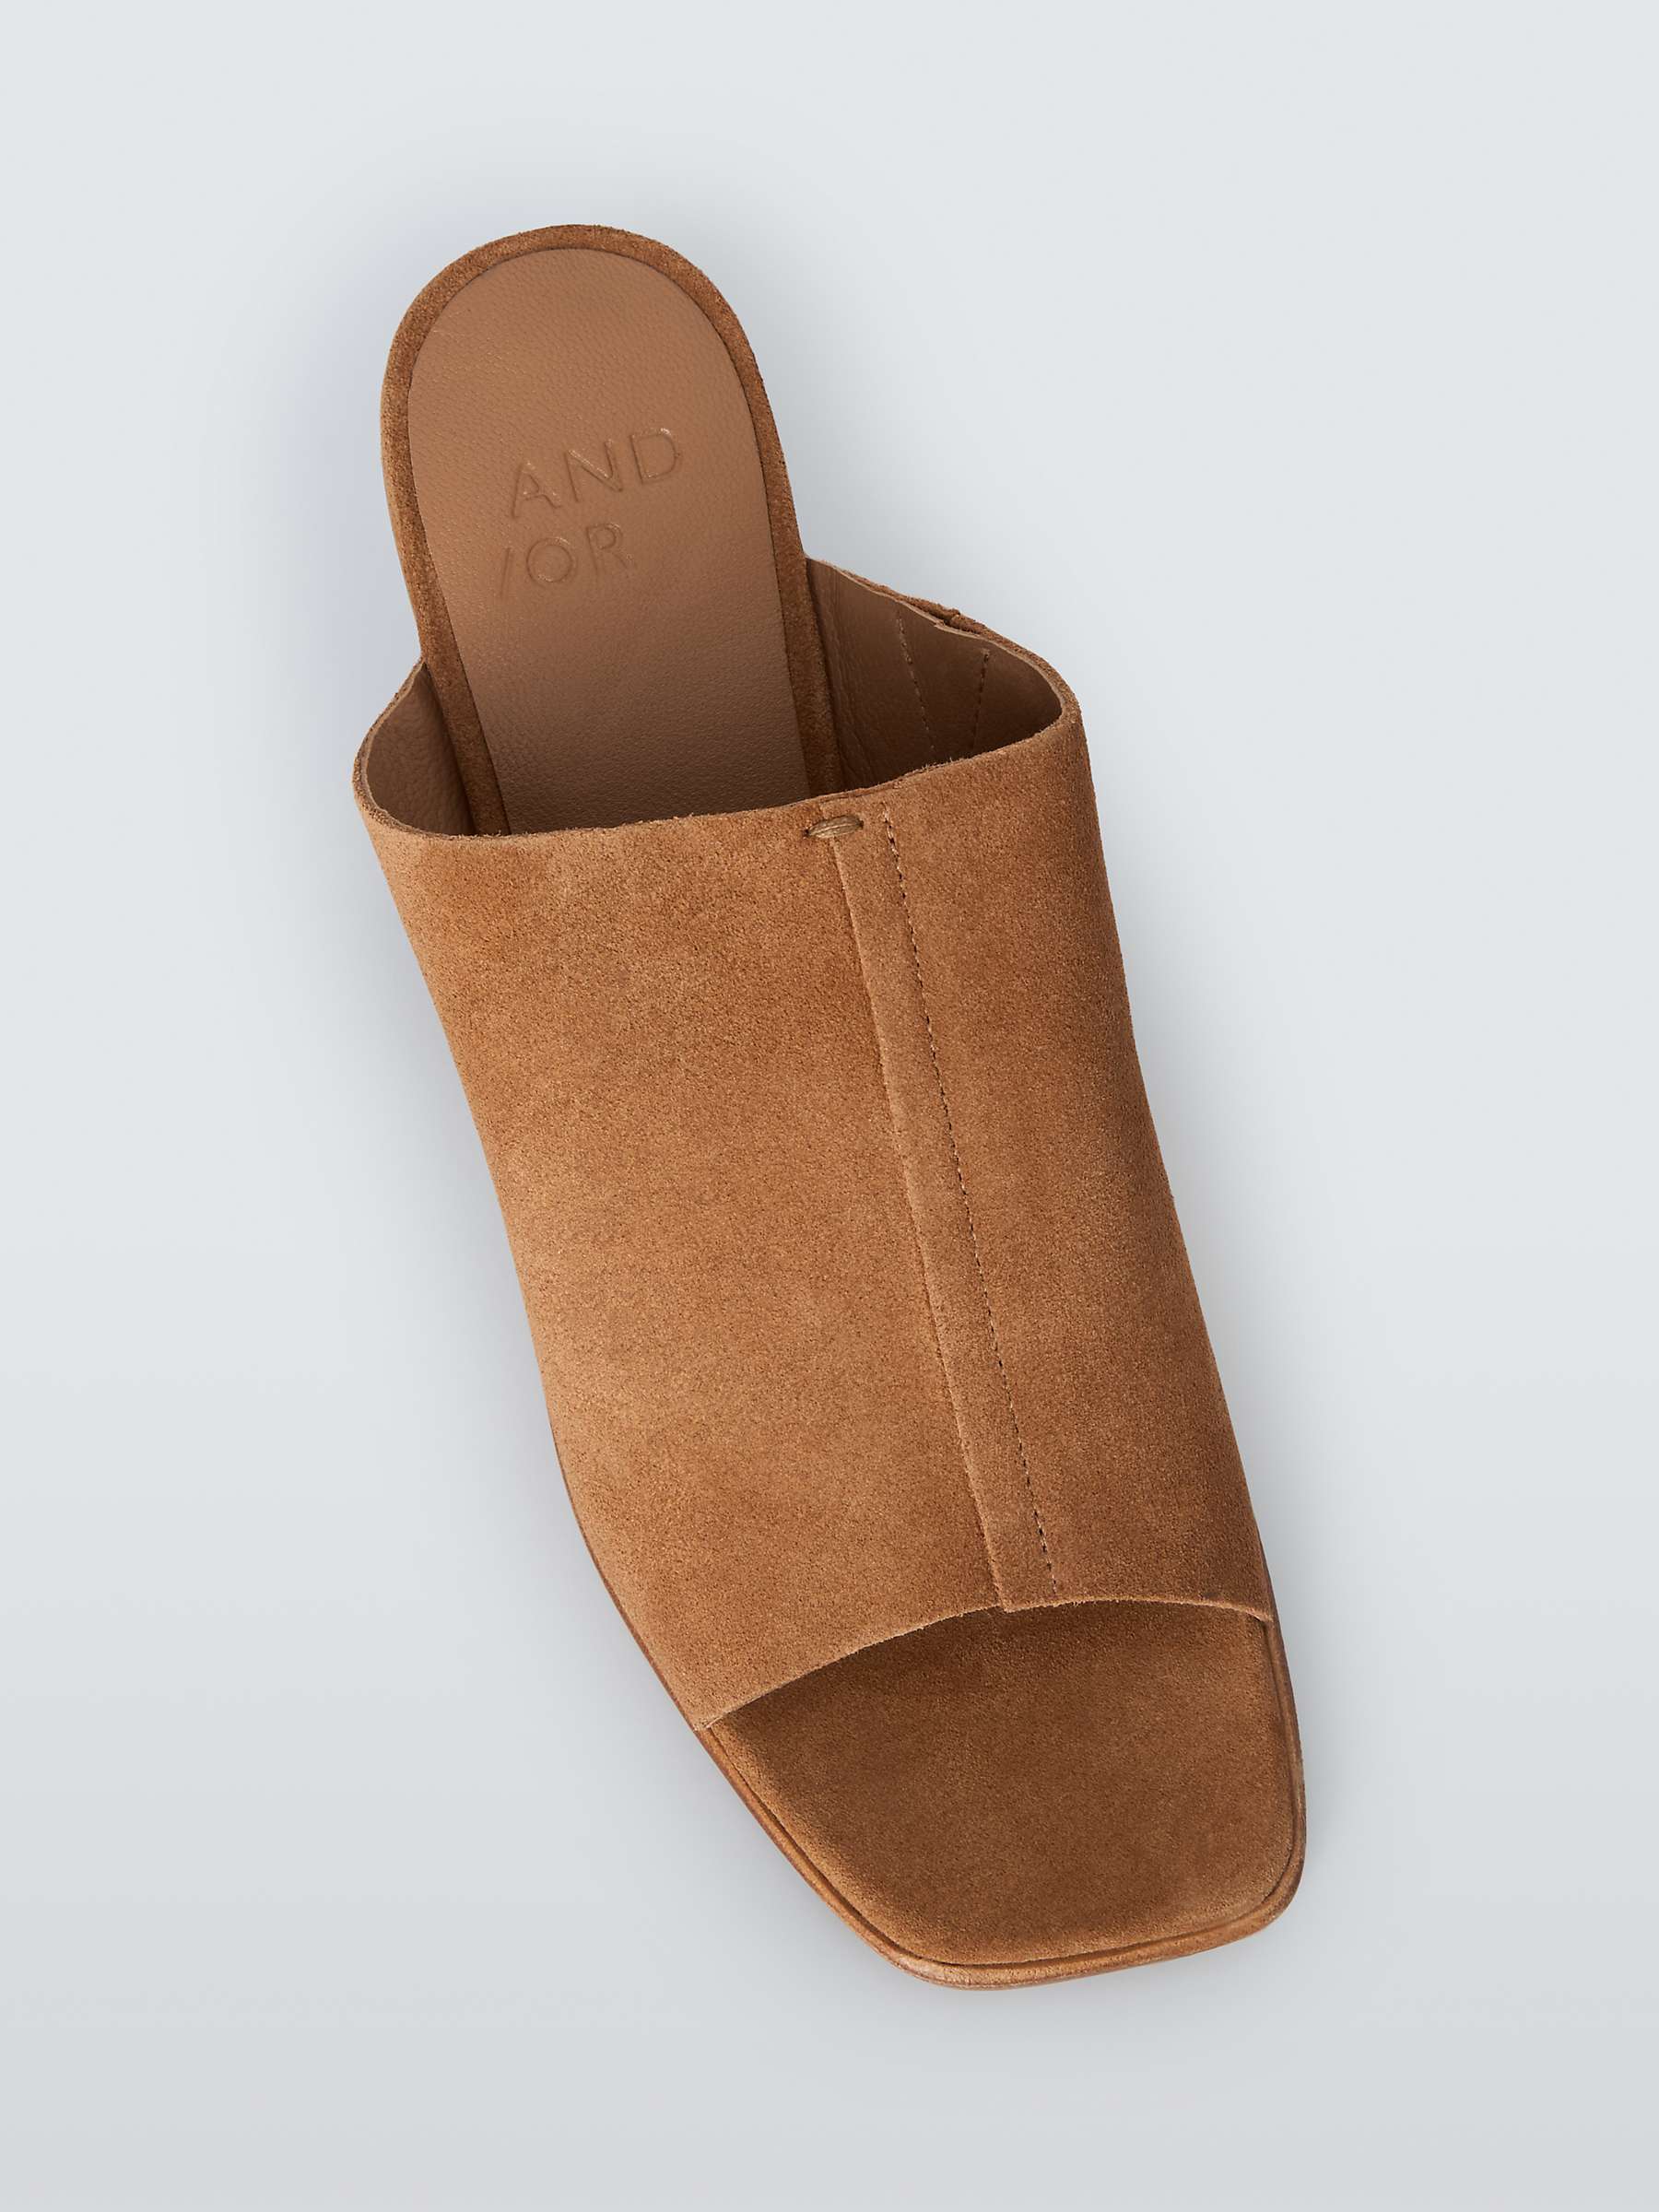 Buy AND/OR Immie Suede Soft Casual Heel Mule Sandals, Whiskey Online at johnlewis.com